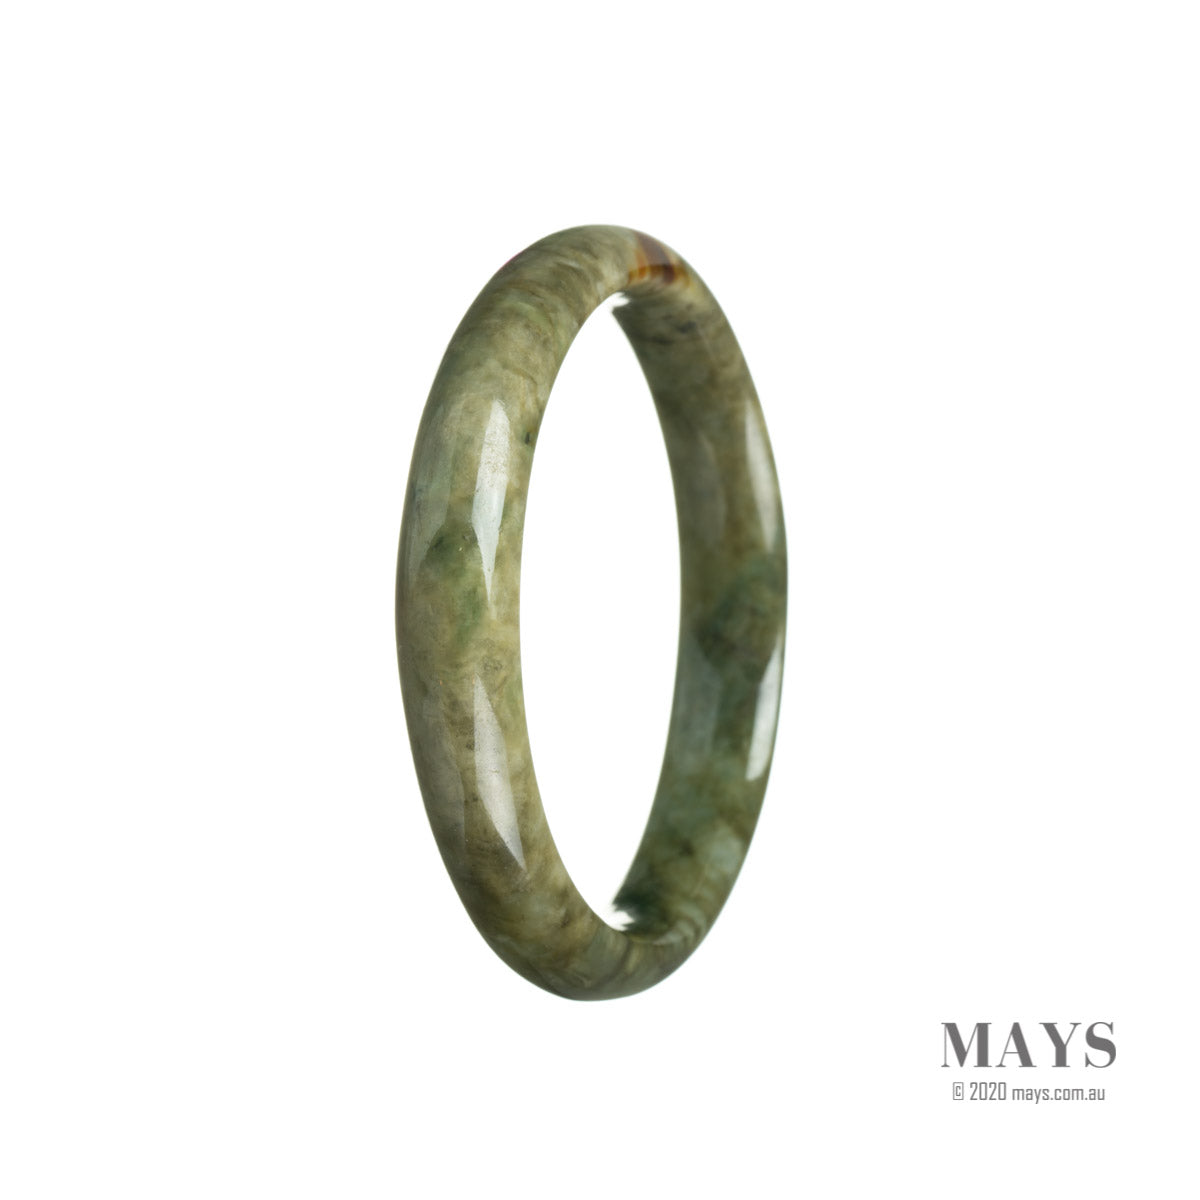 A beautiful, high-quality brownish green jadeite bangle with a half moon design, measuring 57mm. Perfect for adding a touch of elegance to any outfit.